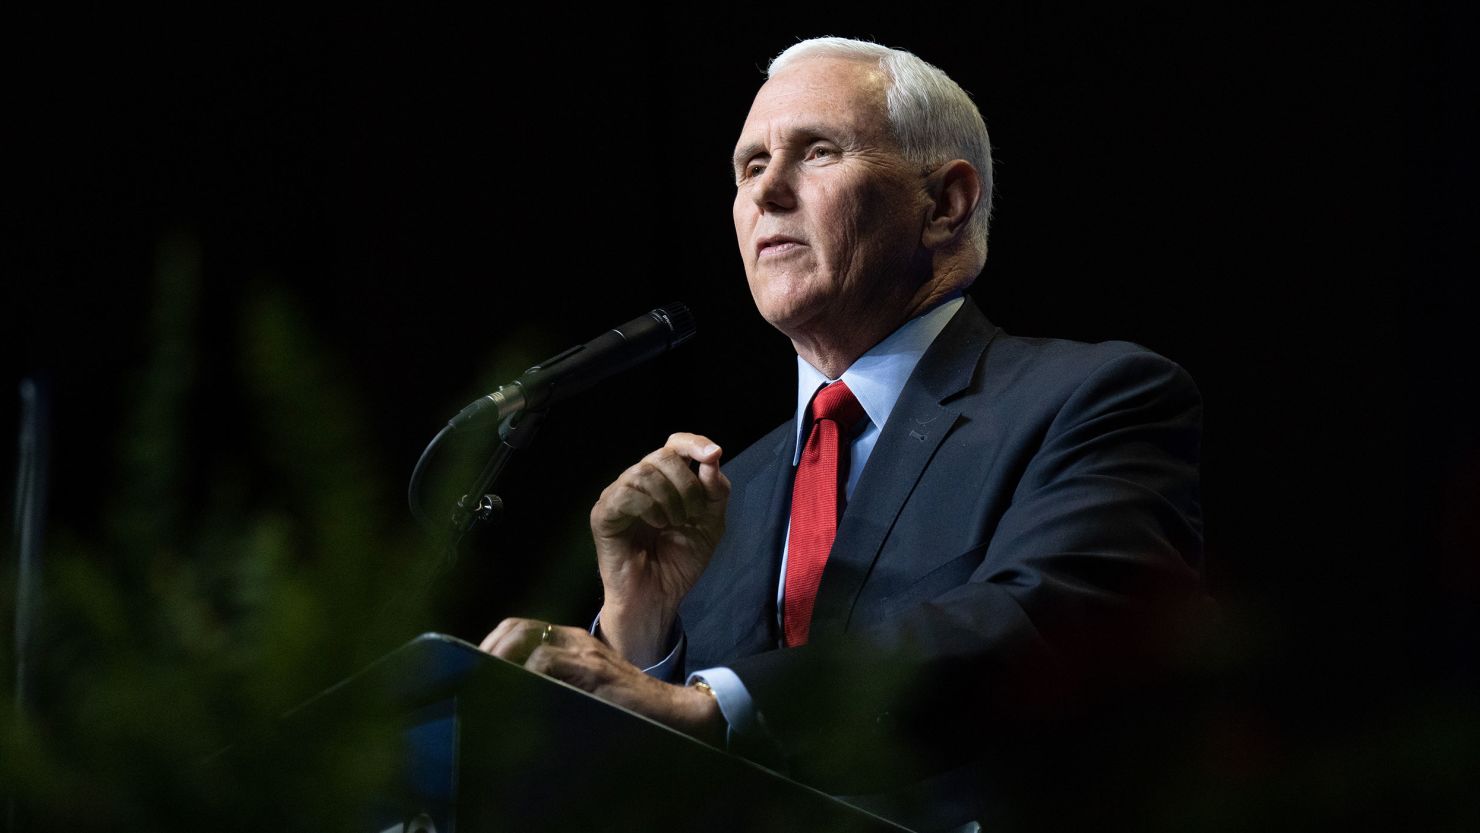 Former Vice President Mike Pence speaks to a crowd during an event sponsored by the Palmetto Family organization on April 29, 2021 in Columbia, South Carolina. 